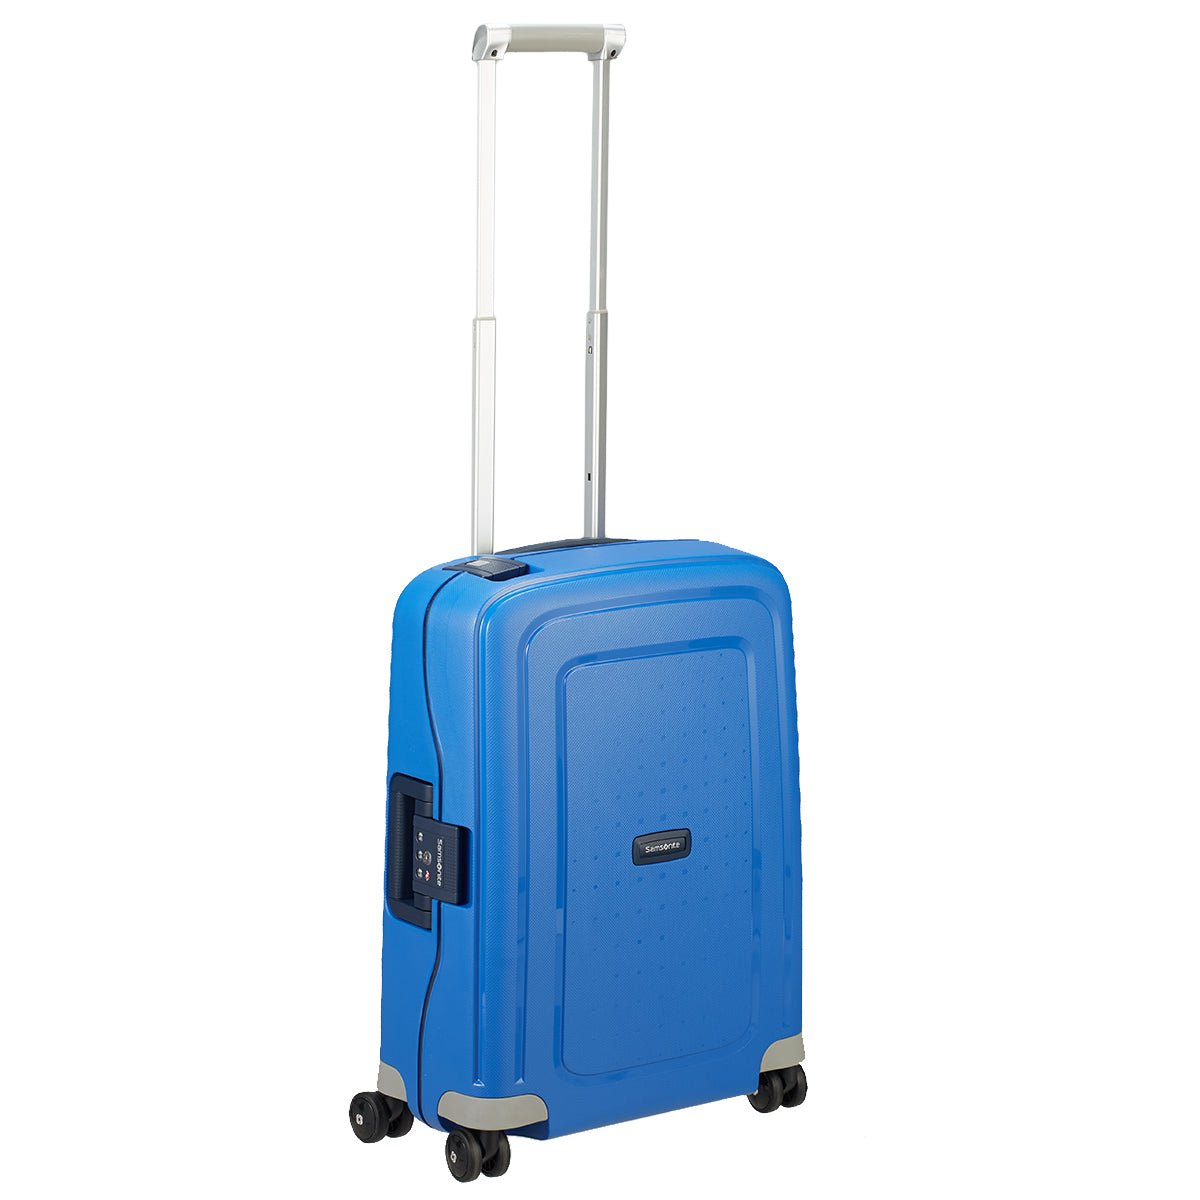 luggage from 3 right Samsonite – The Page